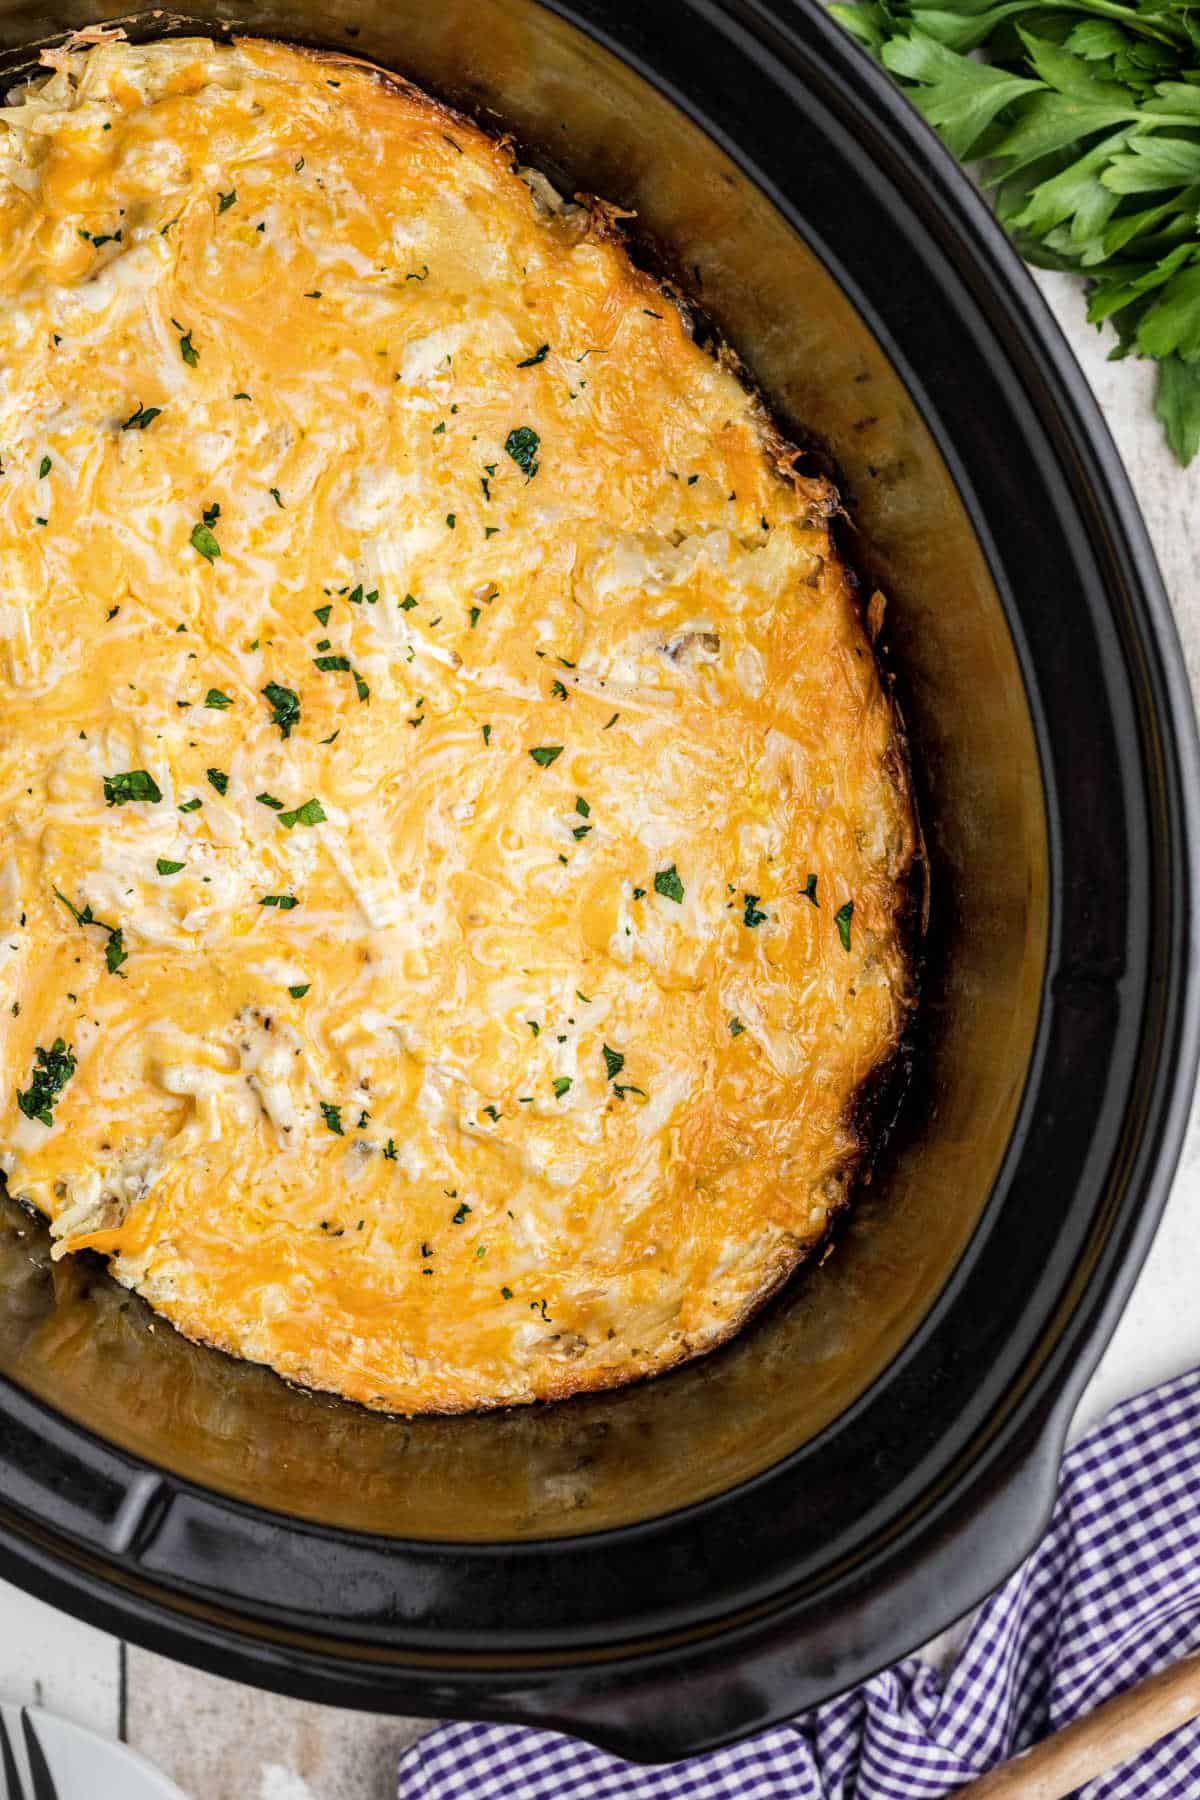 Overhead shot of a slow cooker with a hash brown casserole inside, looks cheesy.